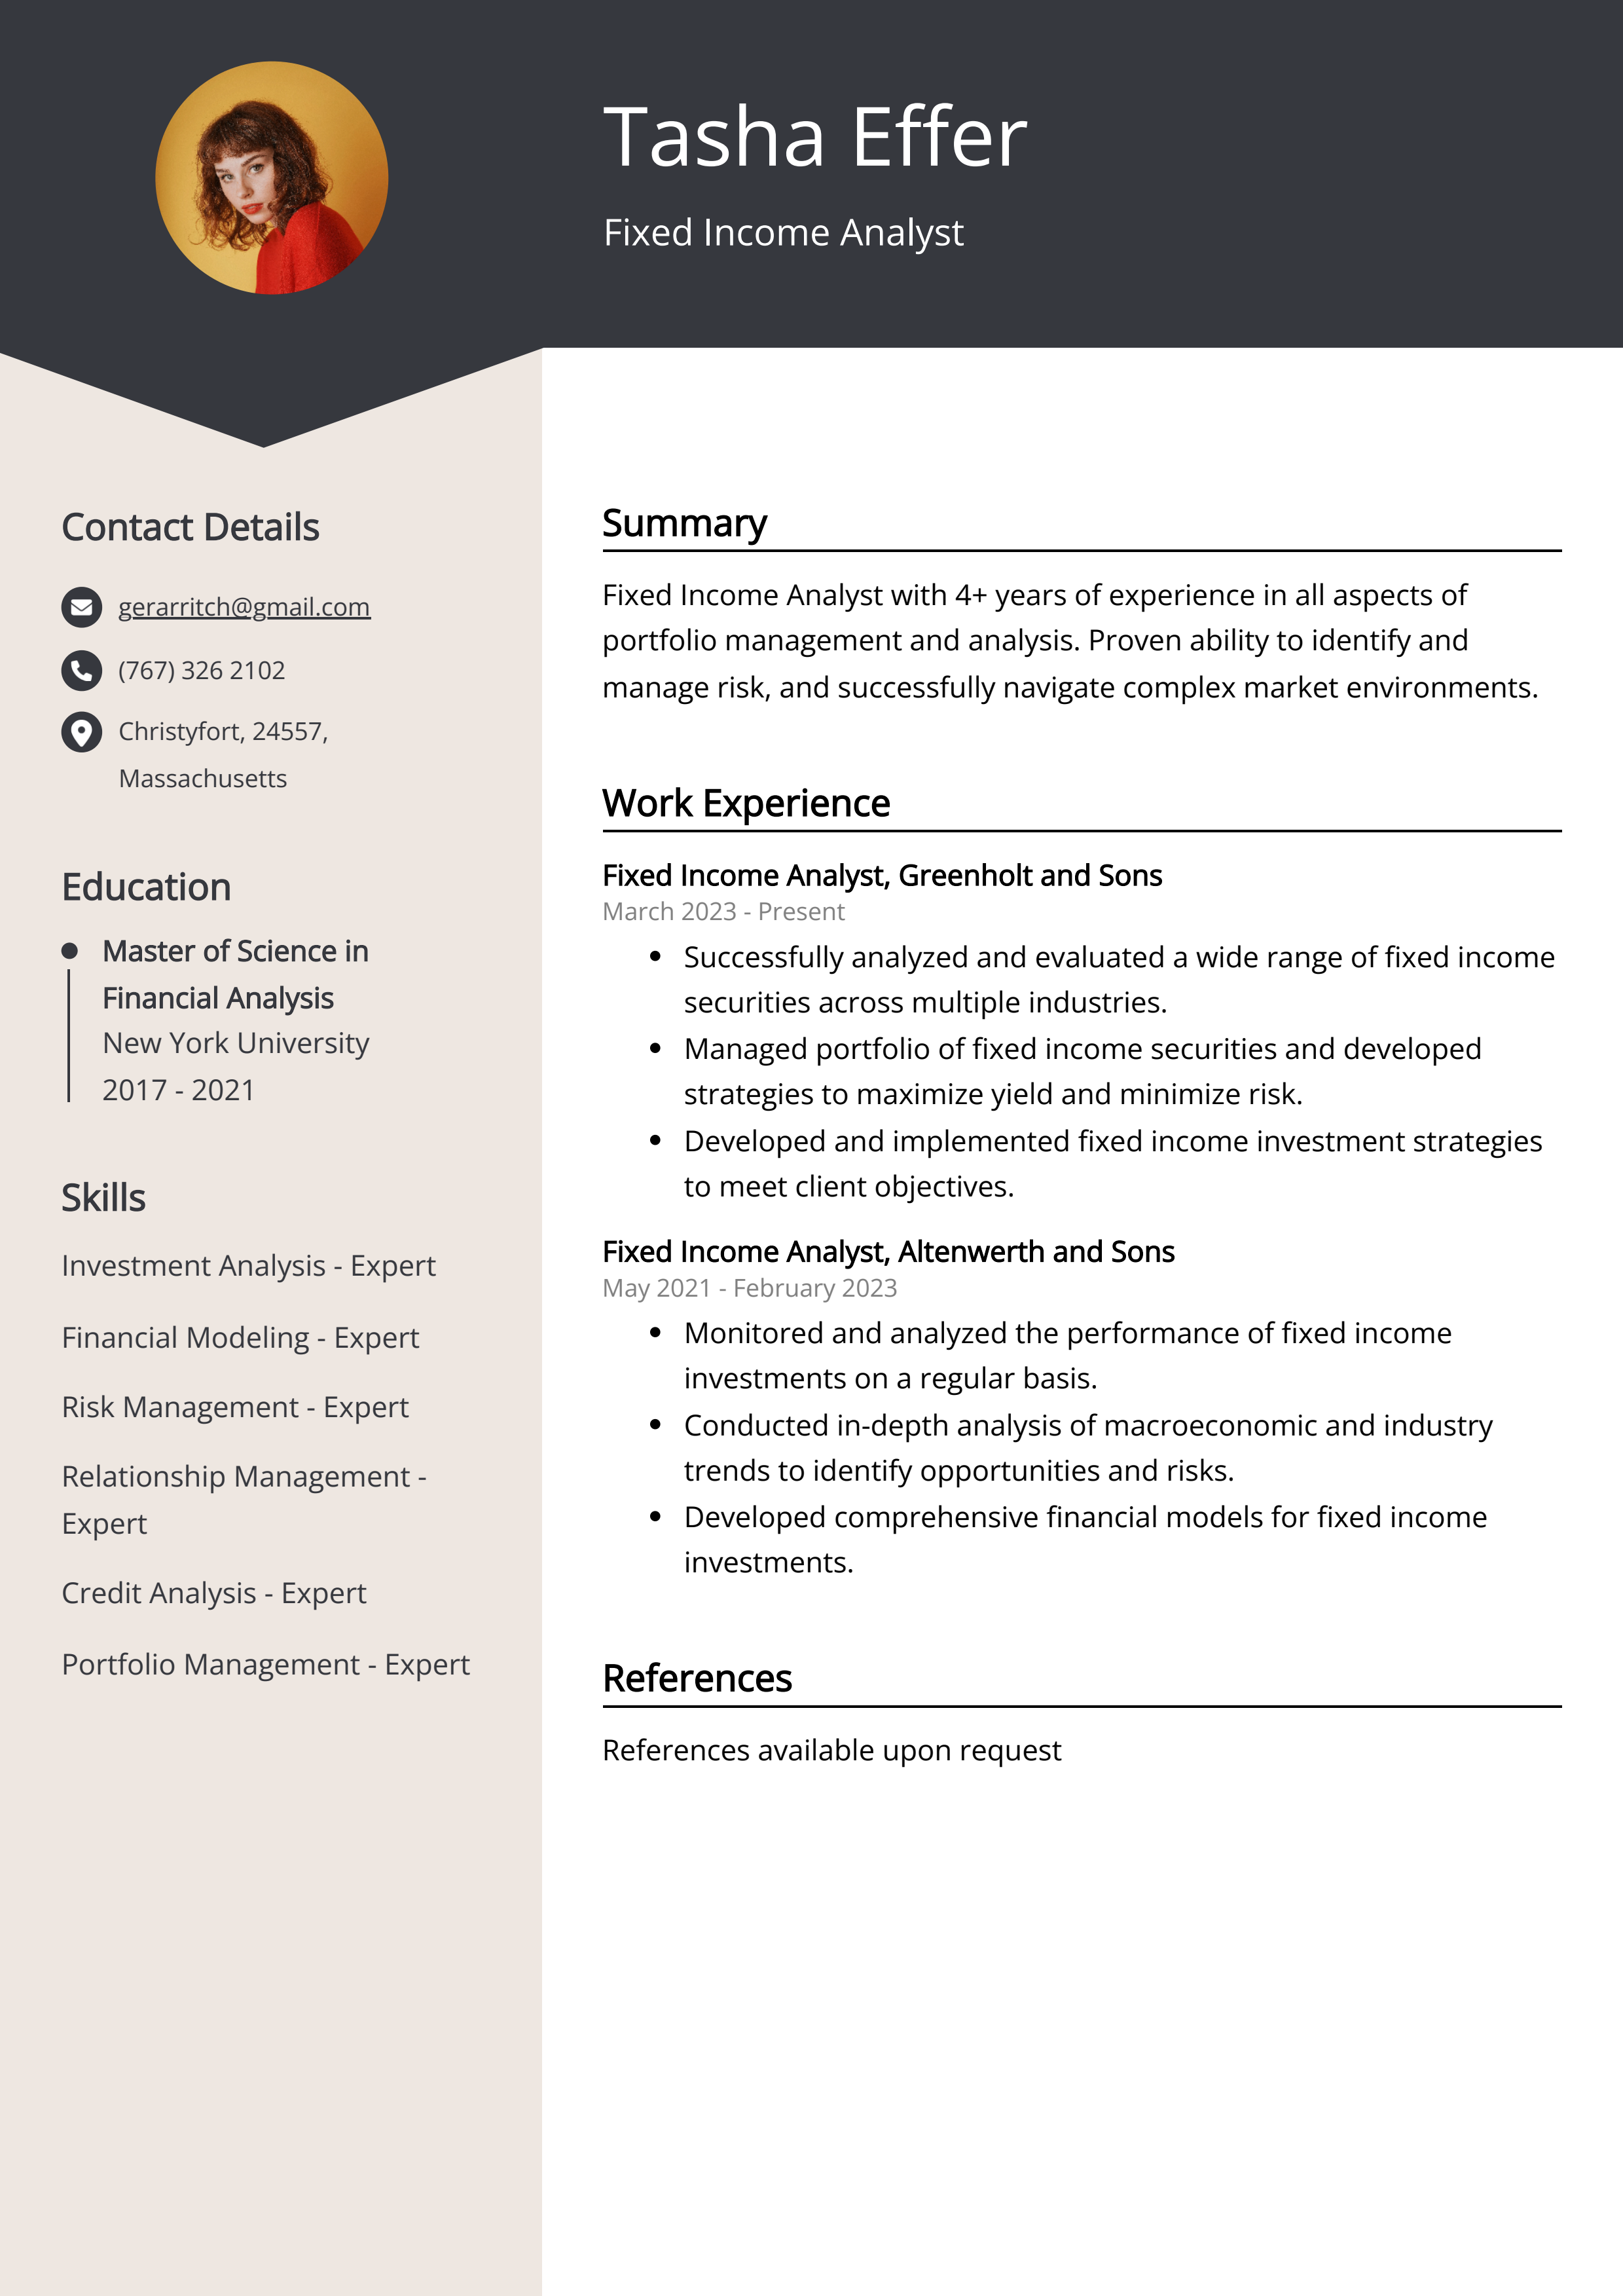 Fixed Income Analyst CV Example